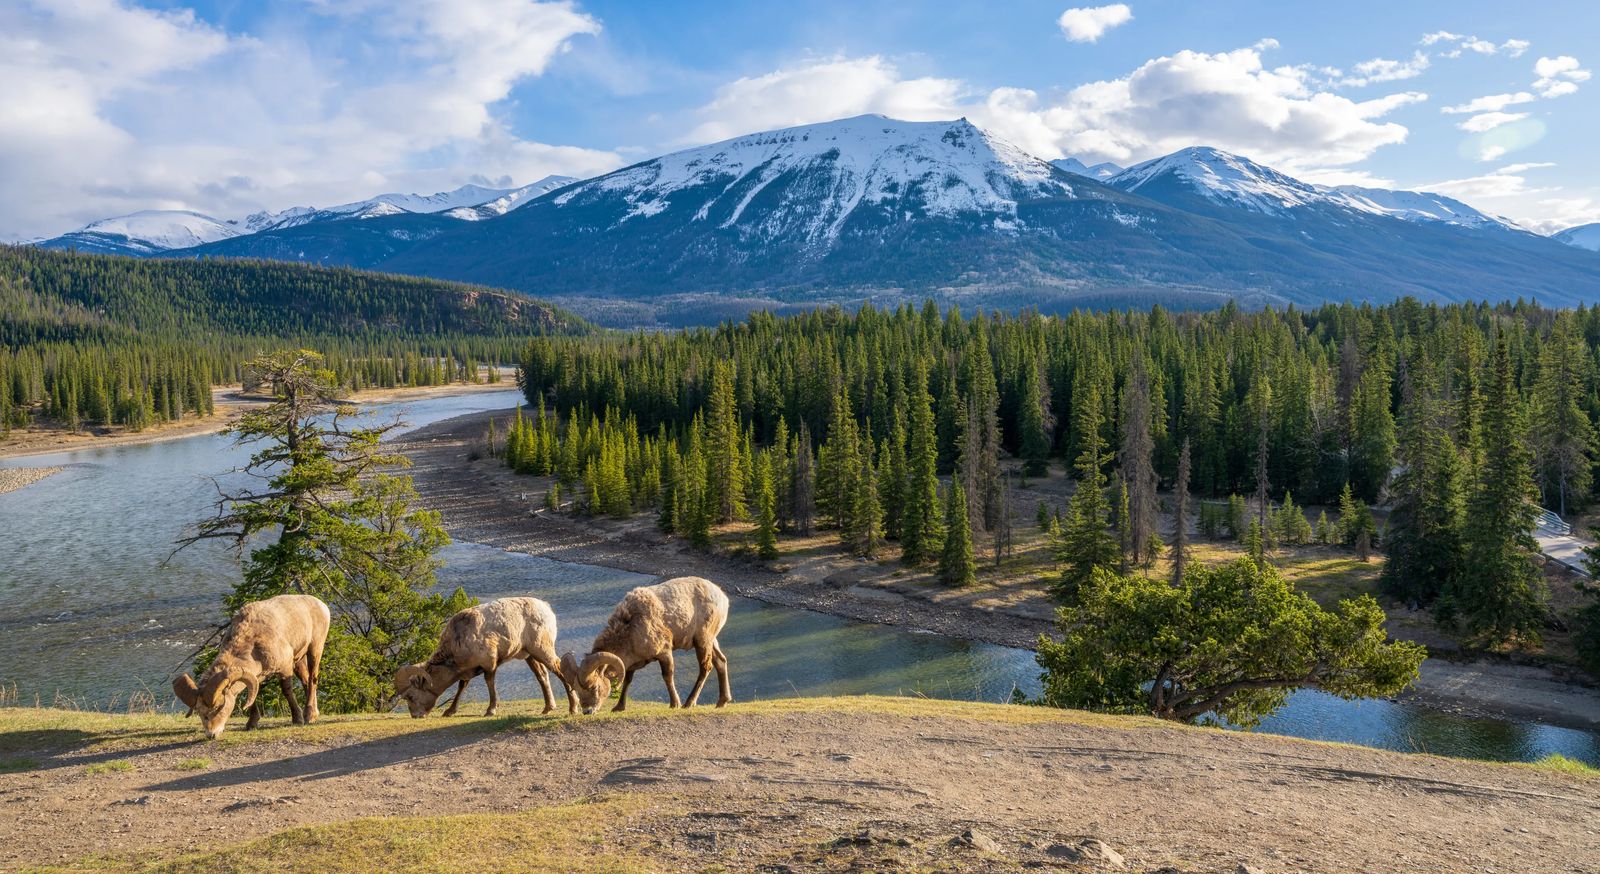 Big Horn Sheep on a cliff above Athabasca River - Best places to visit in Jasper National Park